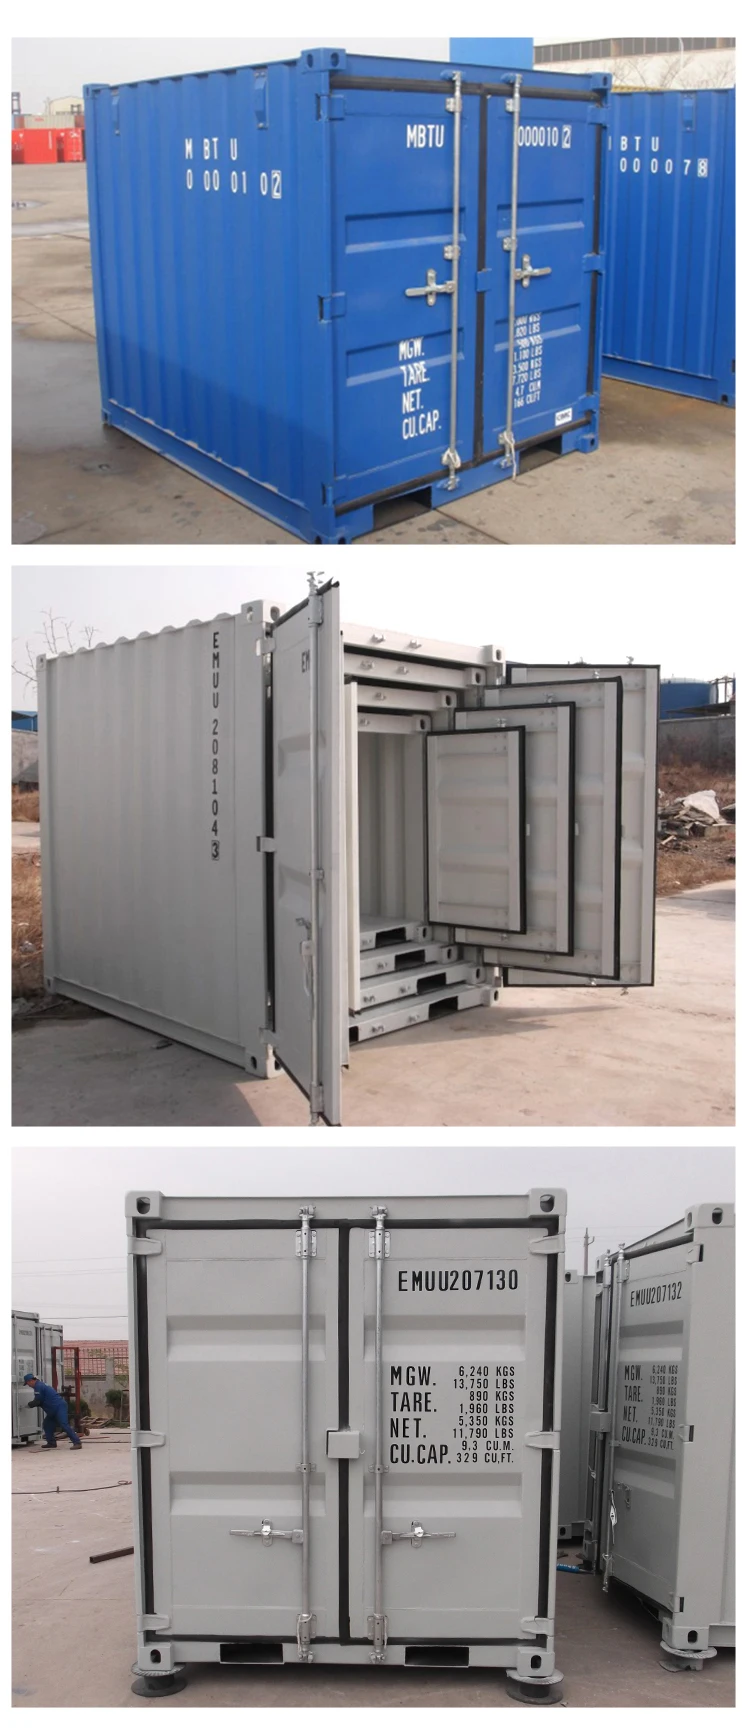 10 FT Container Heavy Duty Extra Large Storage Trunk Box Locker